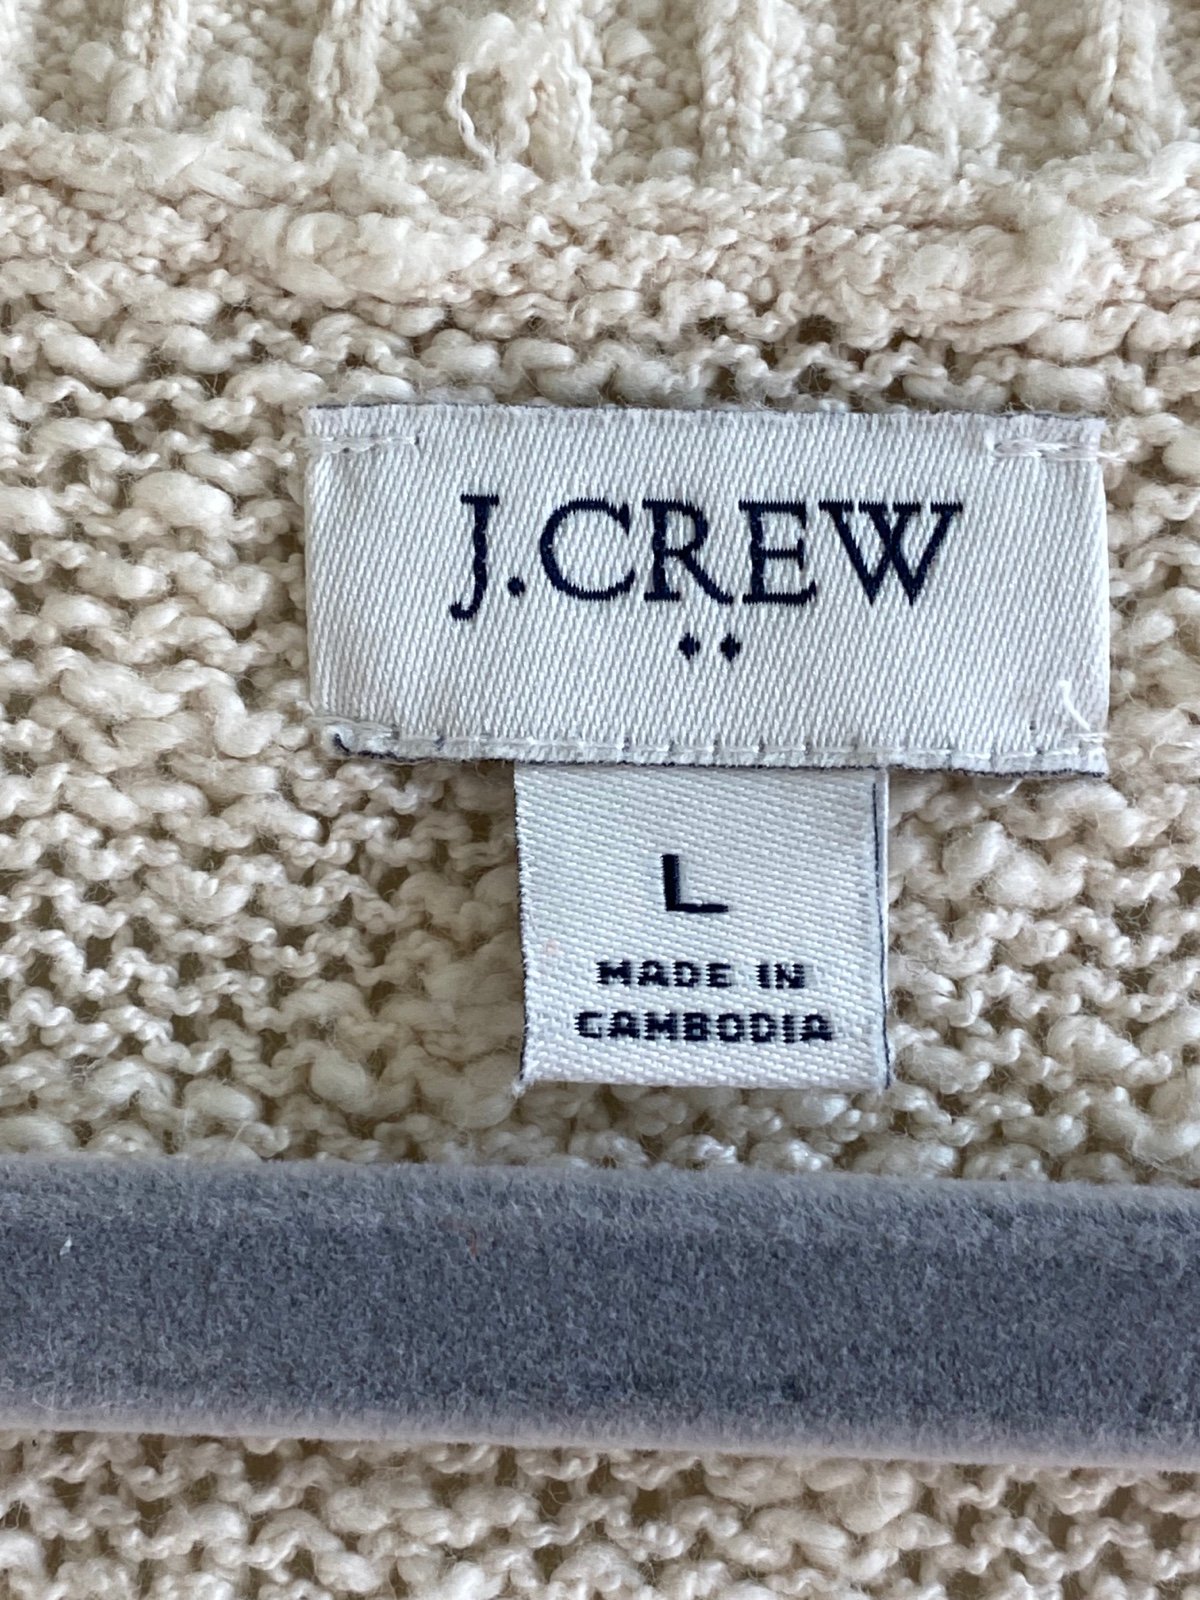 save up to 70% J Crew Knit Sweater oTZQG7PNn New Style